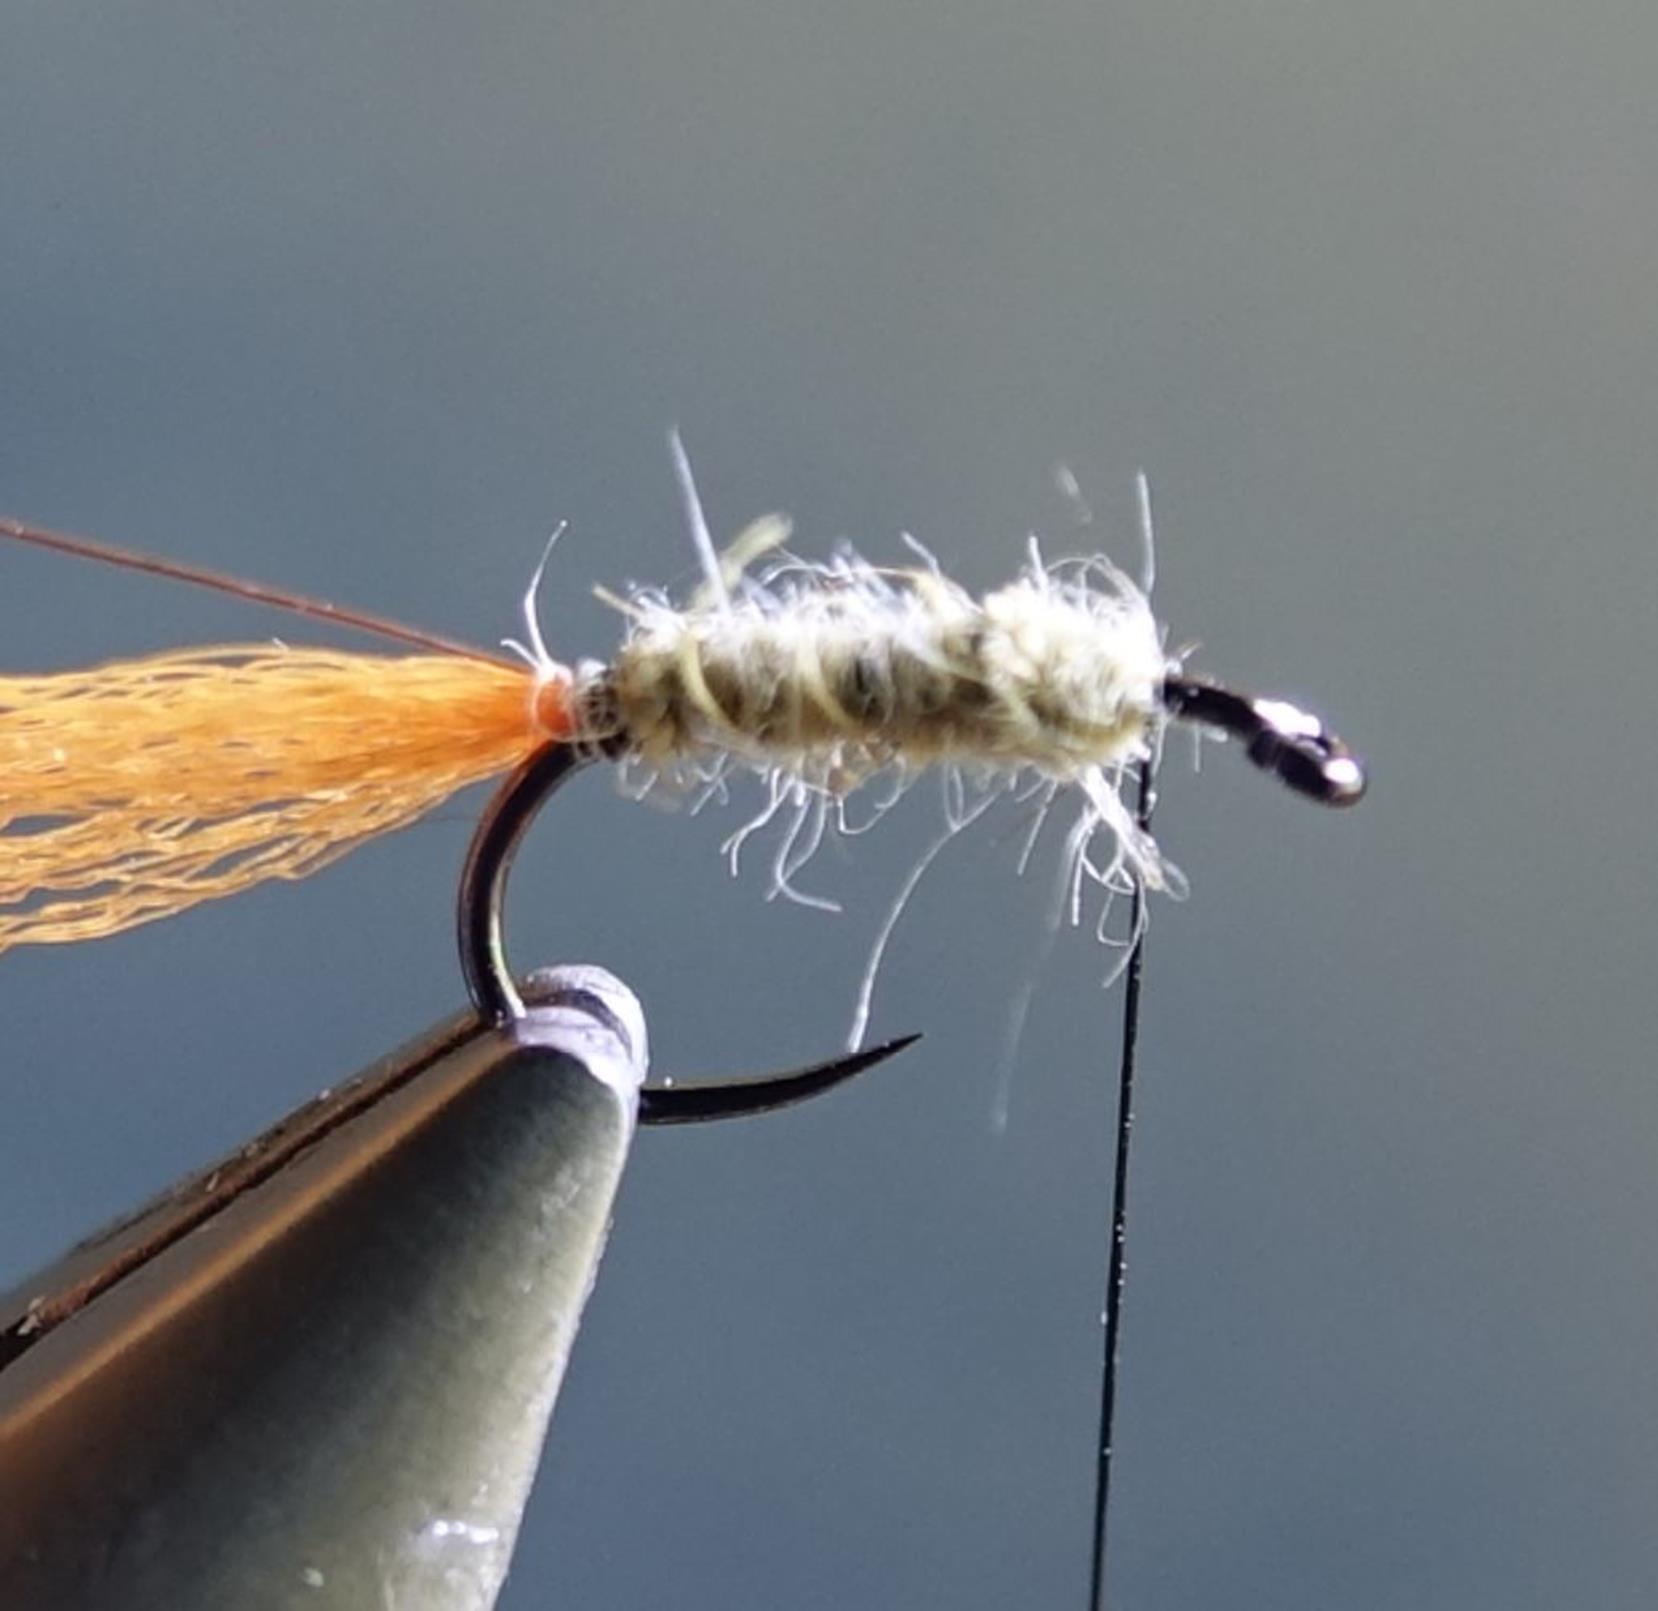 émergente olive ATE dubbing CDC antron lièvre mouche fly tying eclosion